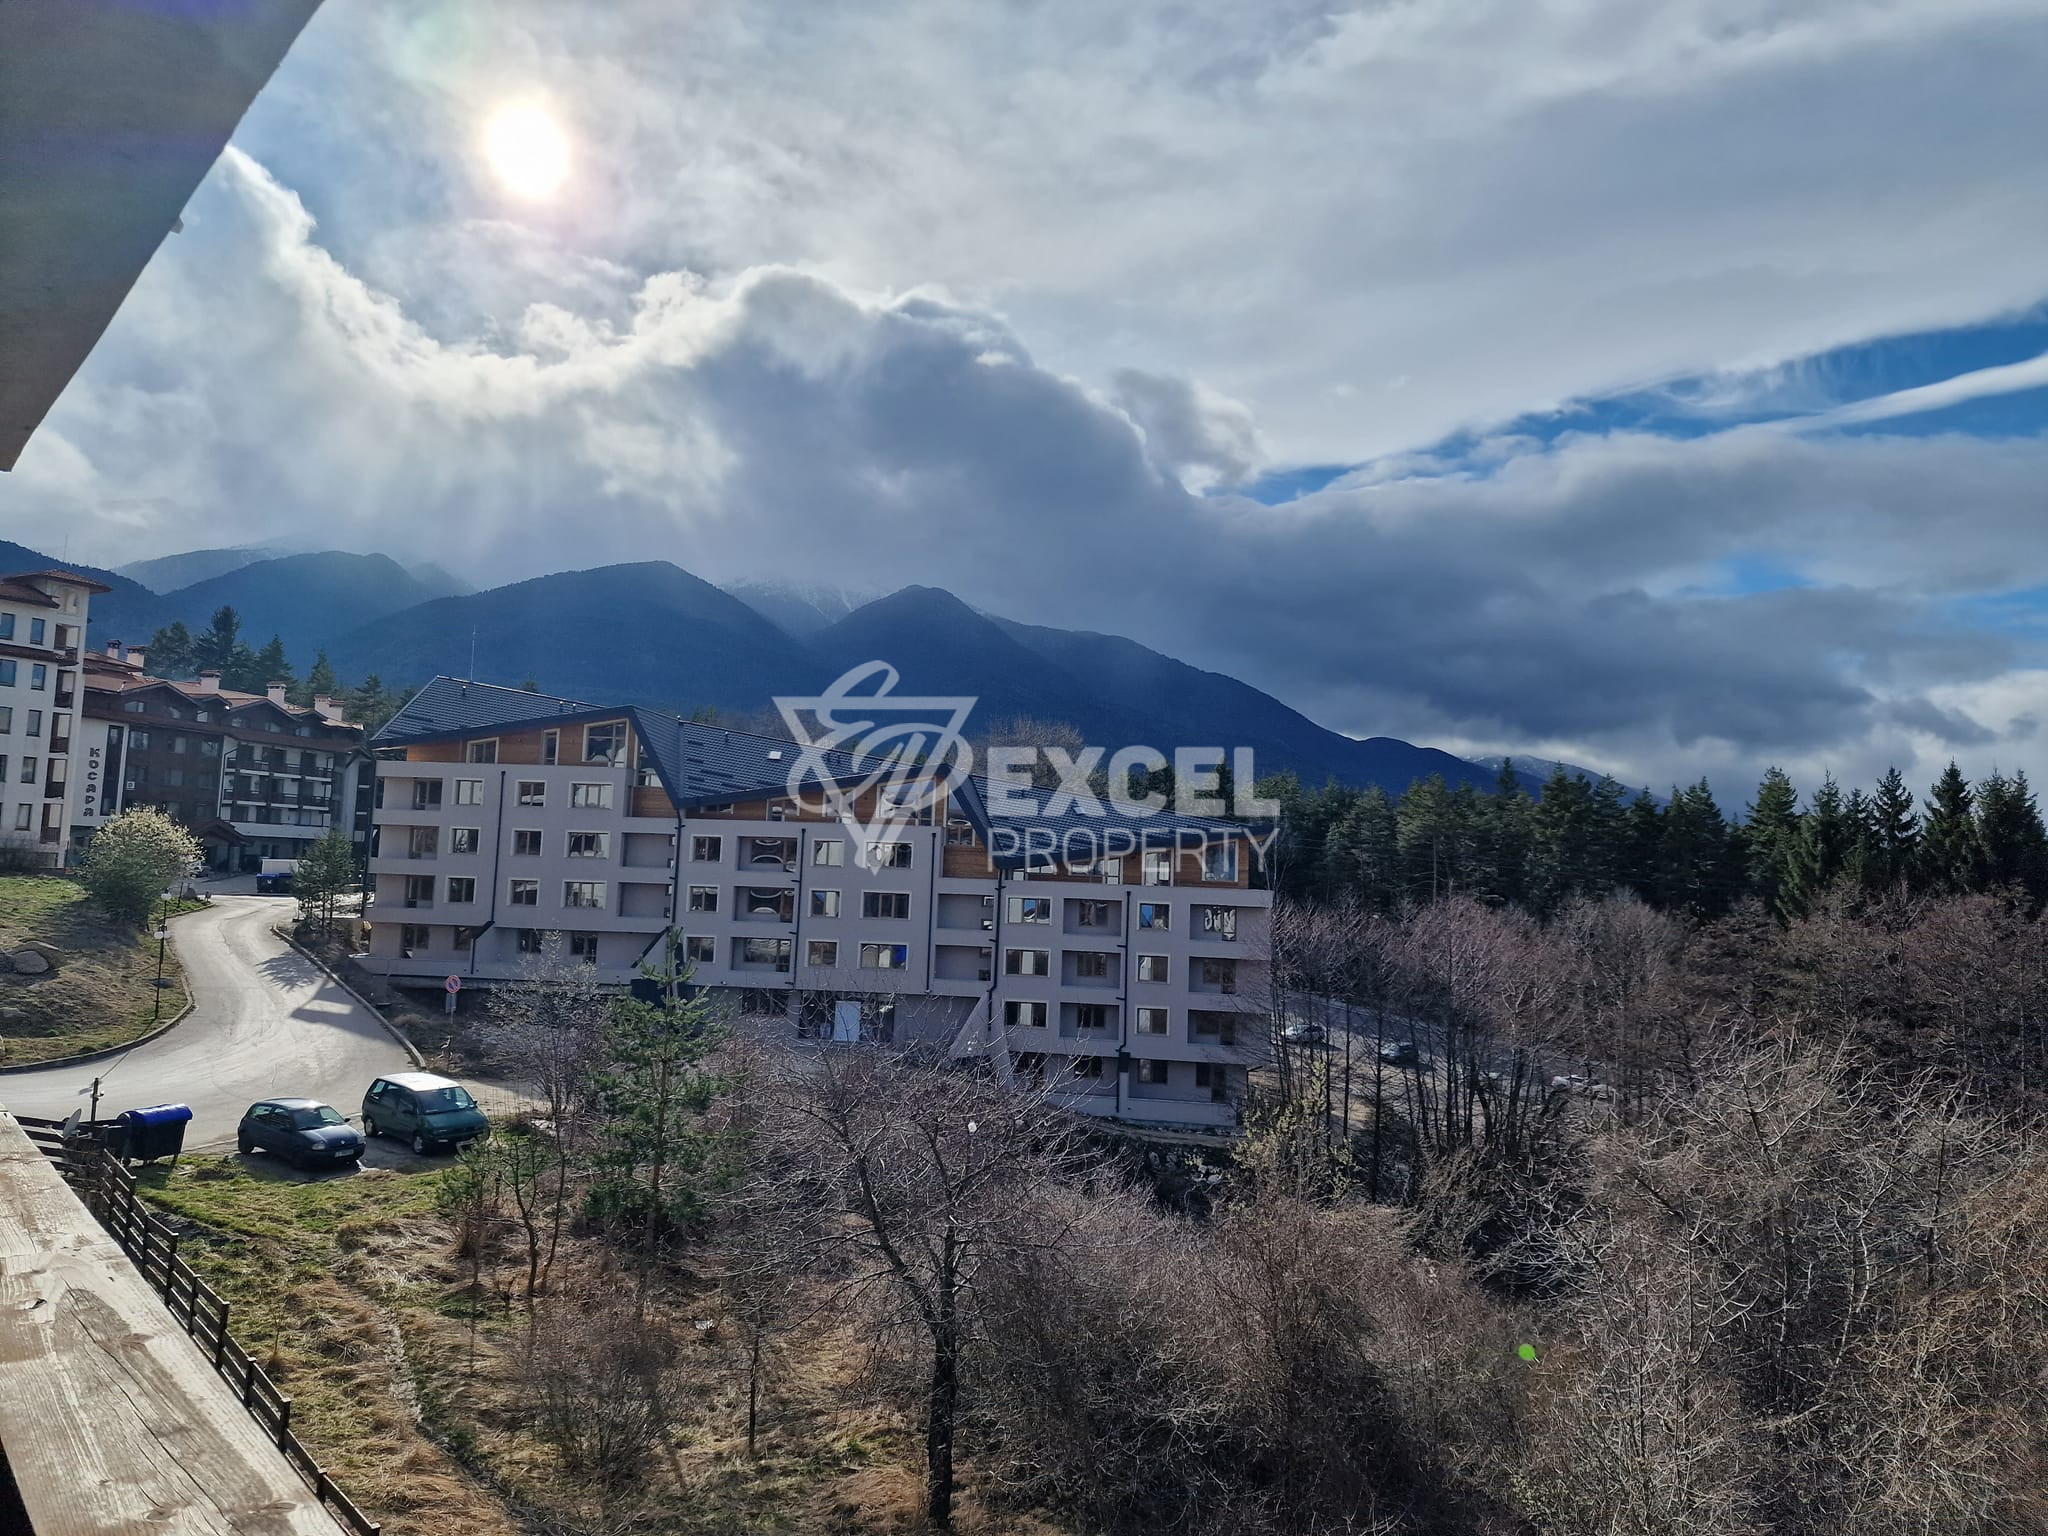 One-bedroom apartment with underground parking space and low maintenance fee for sale in Bansko